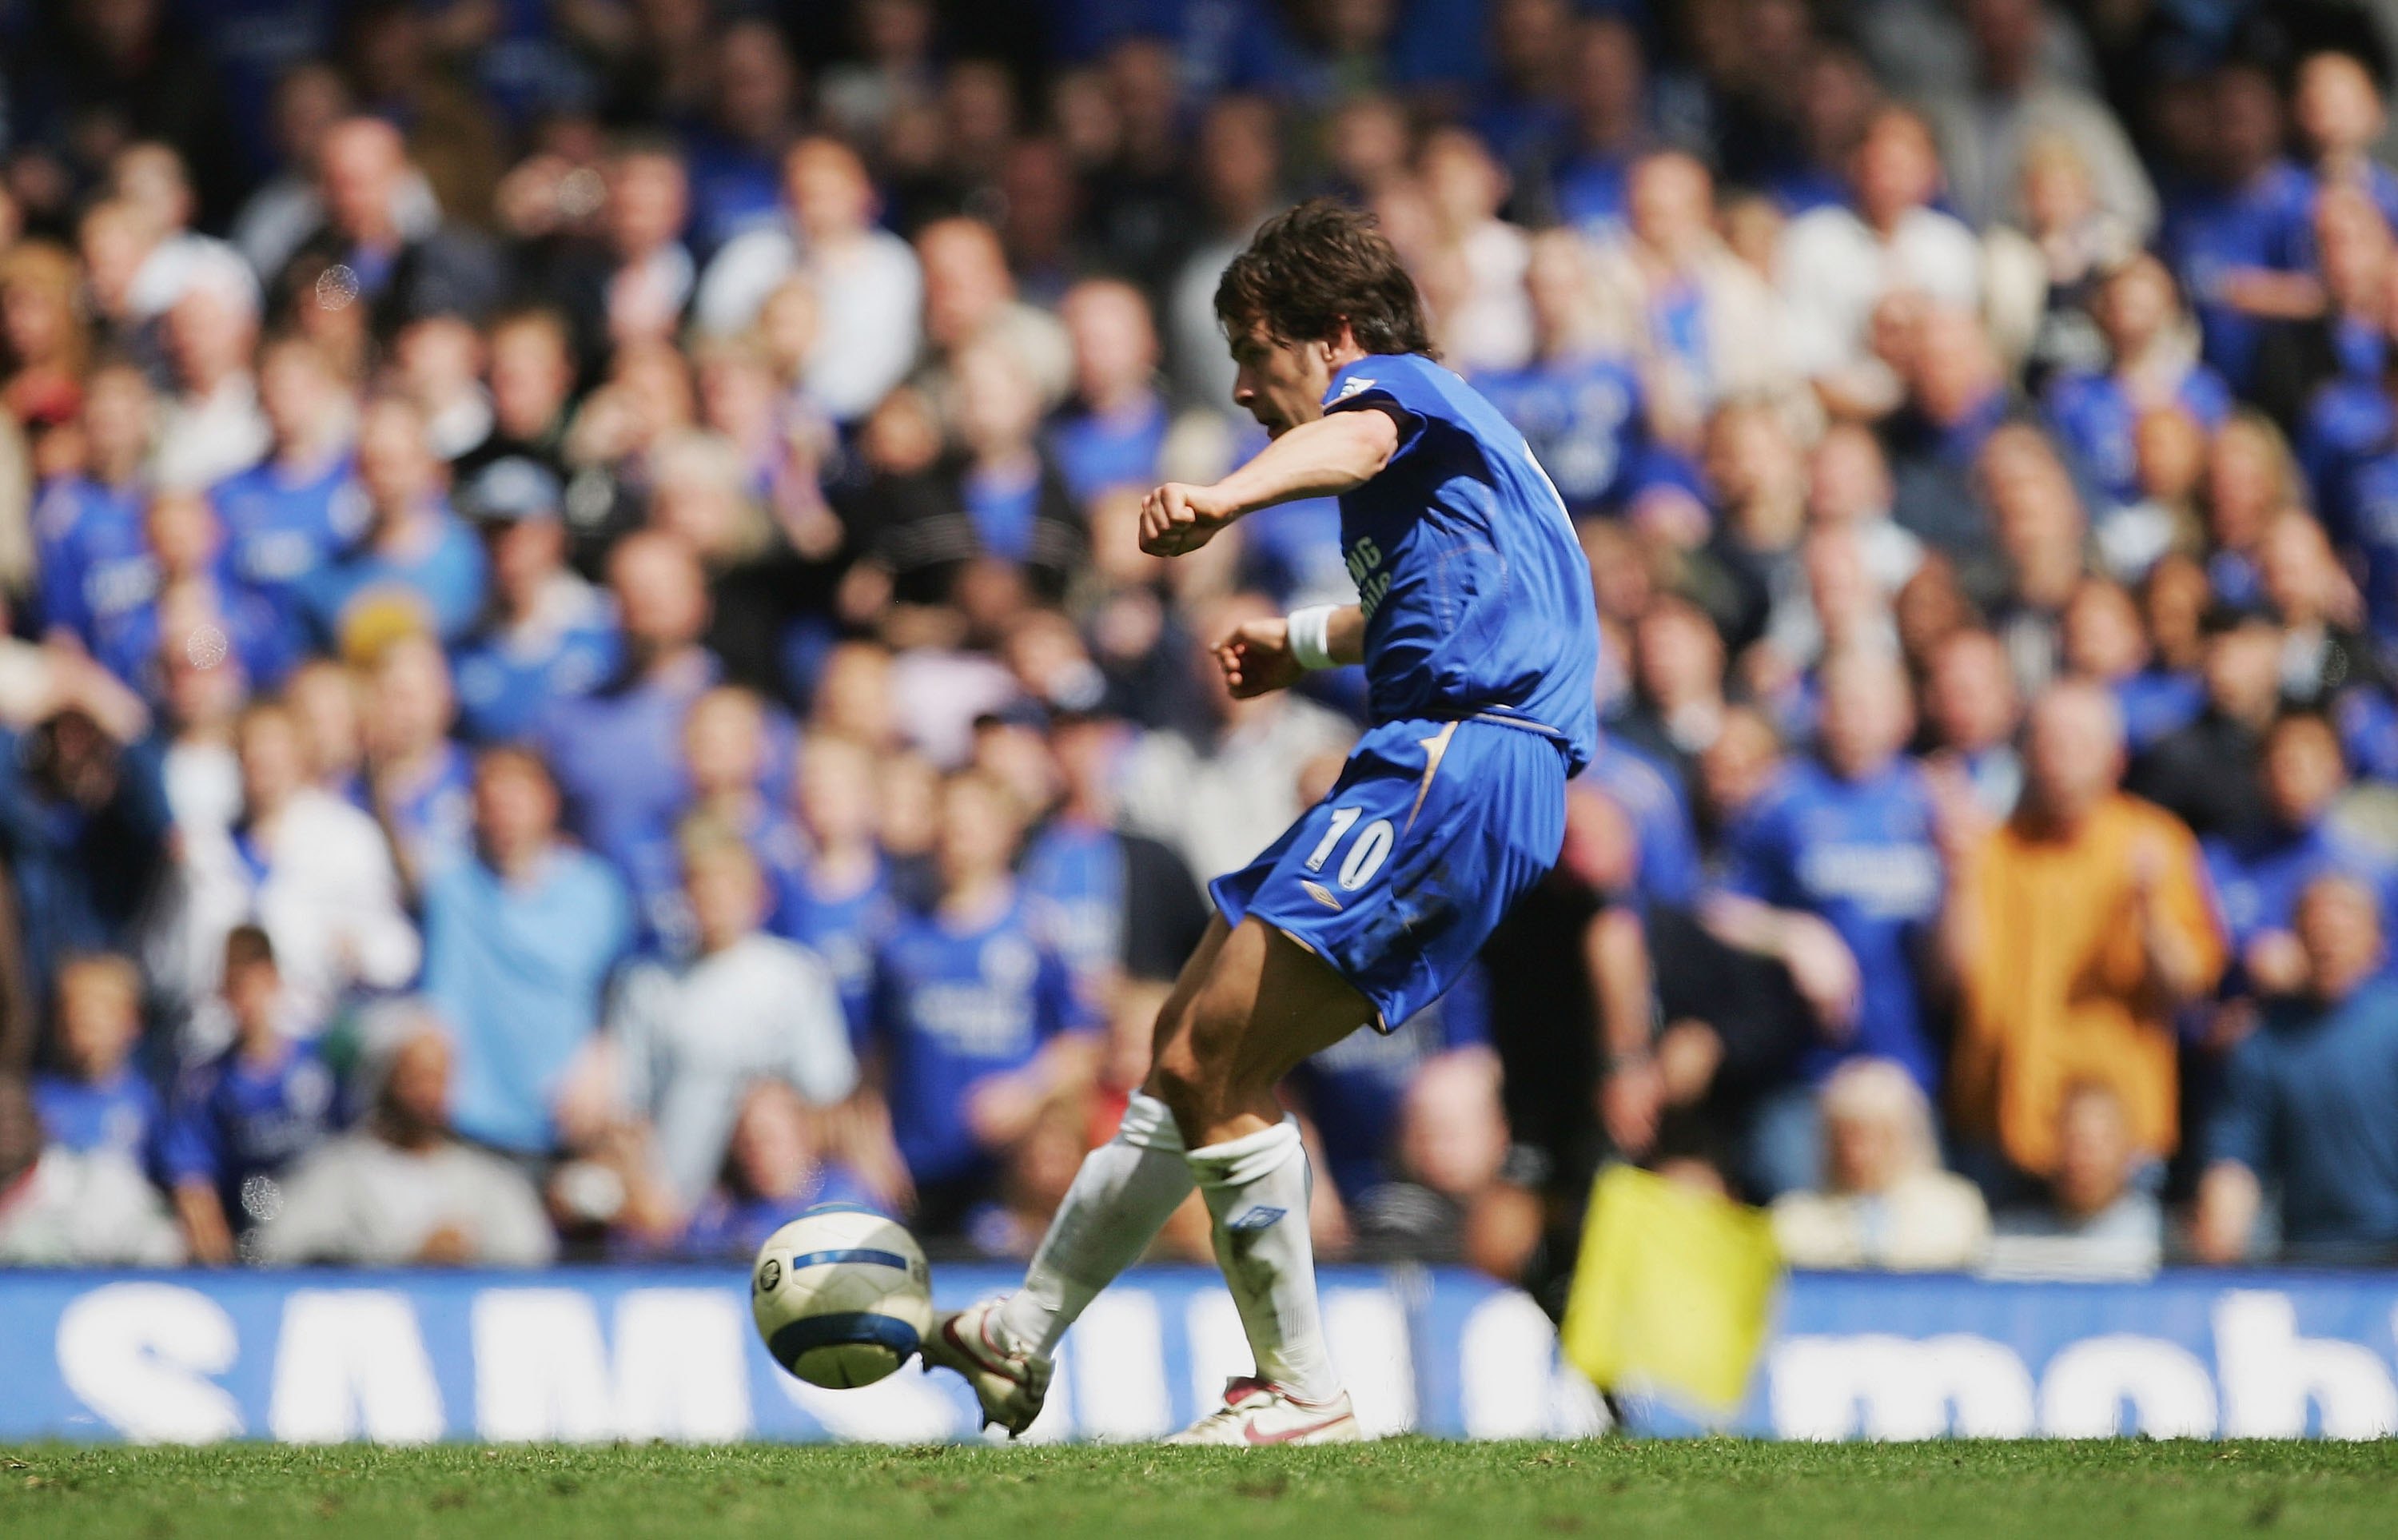 LONDON - APRIL 29:  Joe Cole of Chelsea scores the second goal during the Barclays Premiership match between Chelsea and Manchester United at Stamford Bridge on April 29, 2006 in London, England.  (Photo by Mike Hewitt/Getty Images)